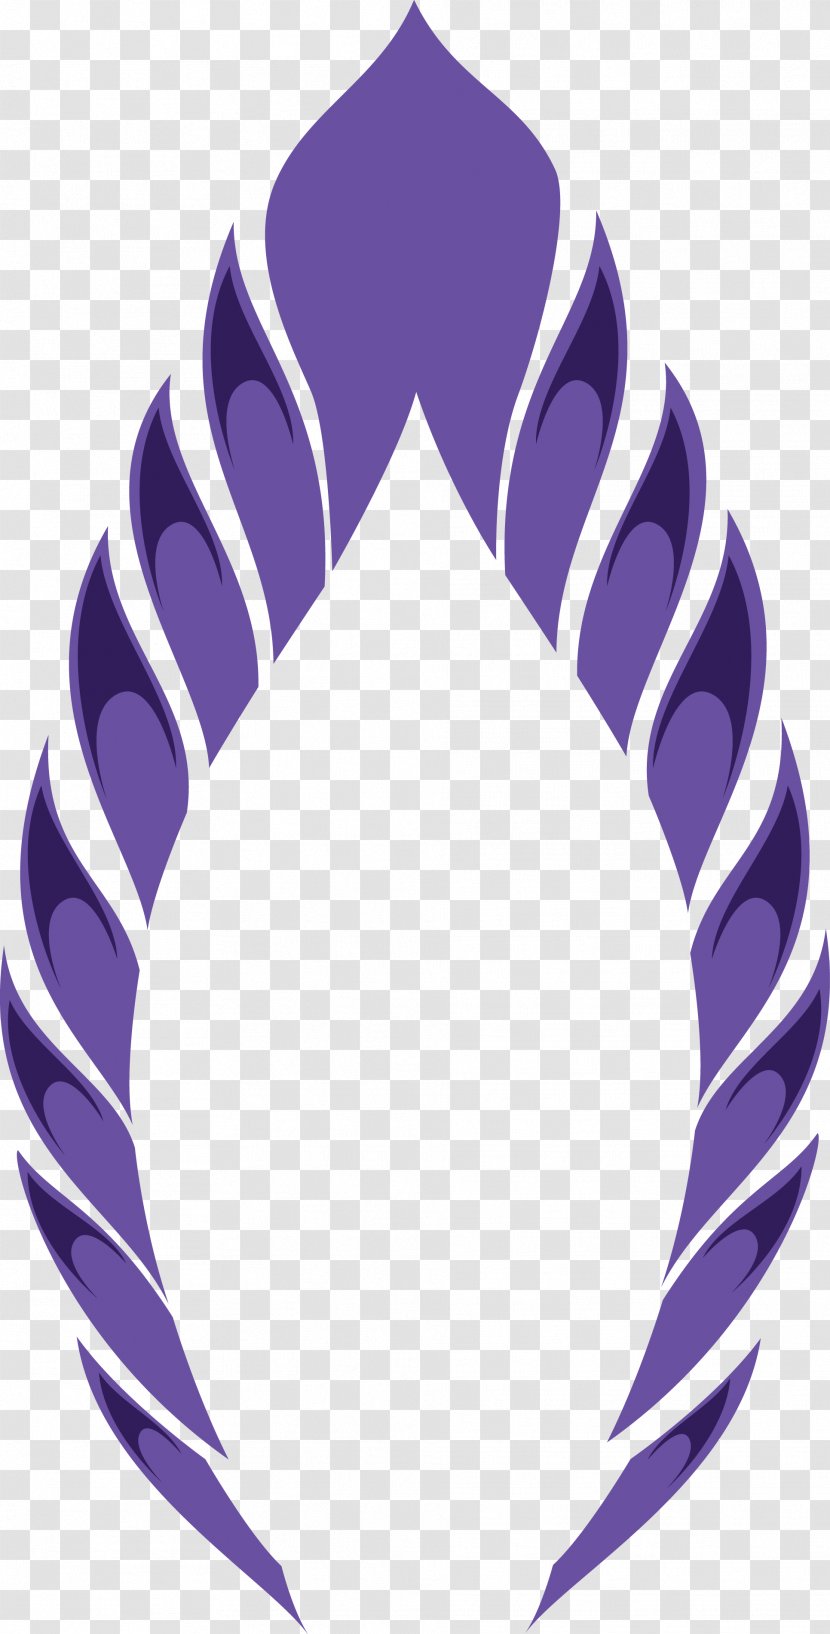 Pavo National Symbols Of India Shape Pattern - Violet - Peacock Vector Transparent PNG